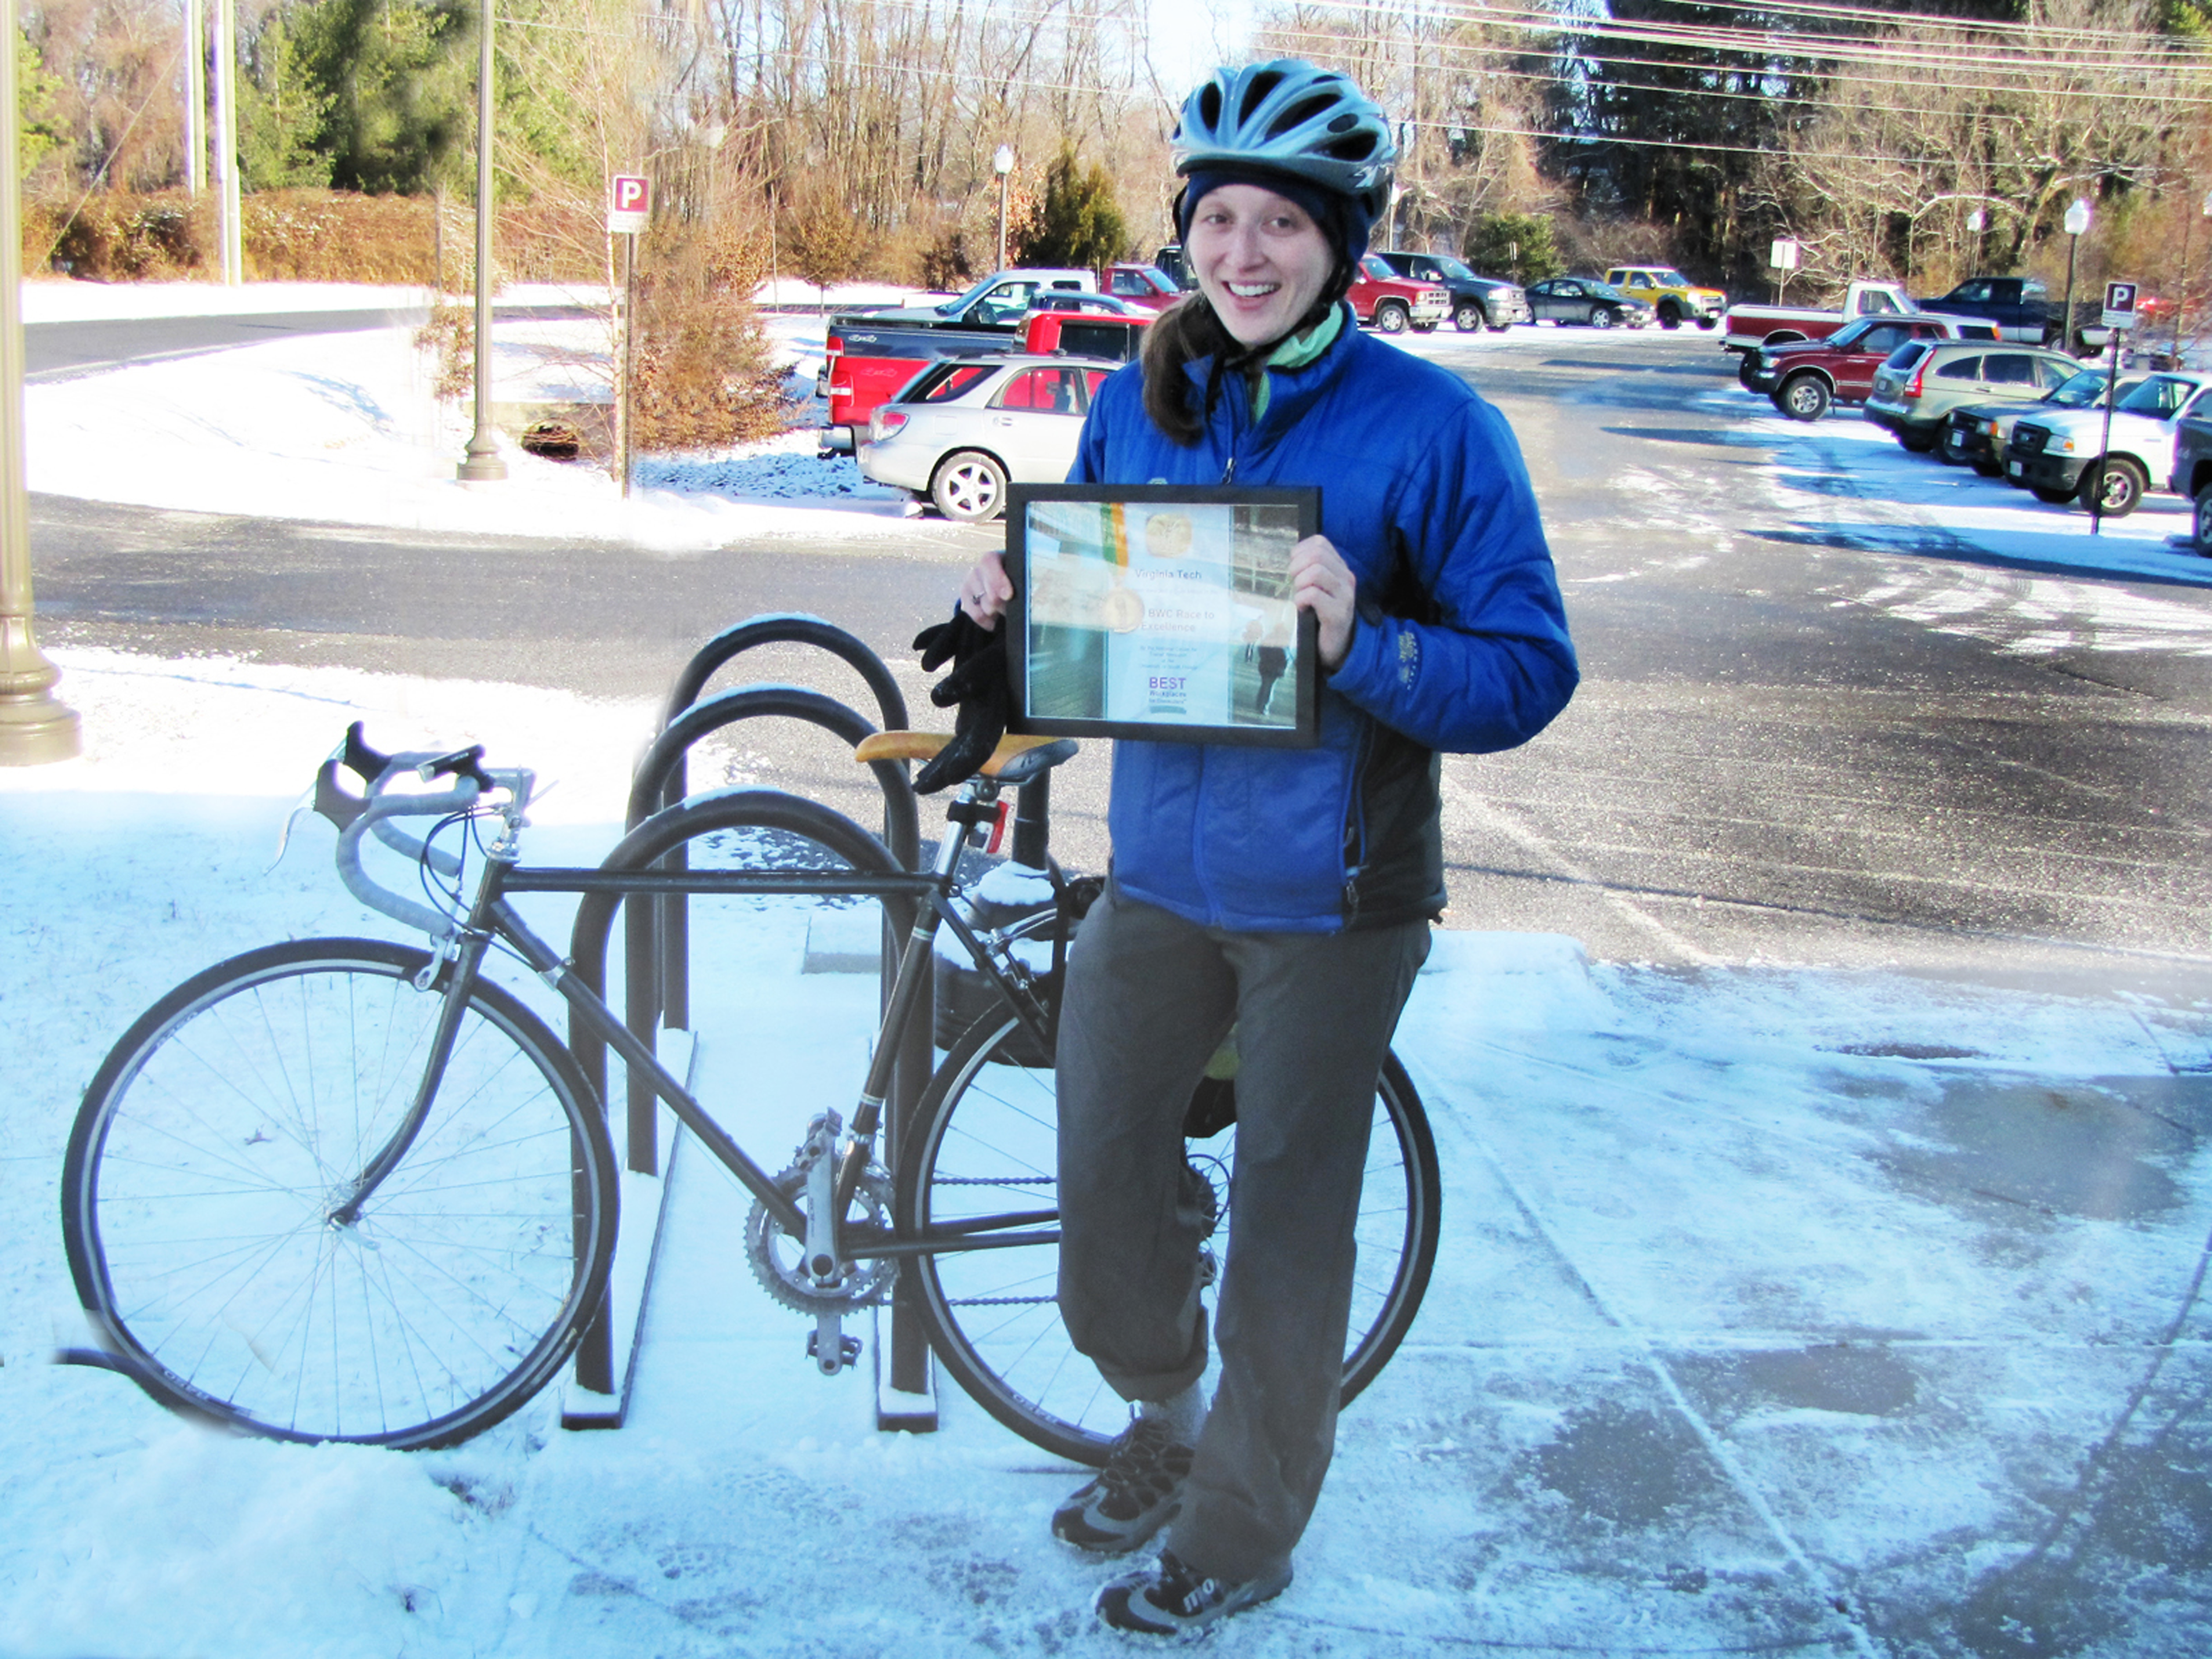 Amada Chassot holds the certificate in front of a bike.